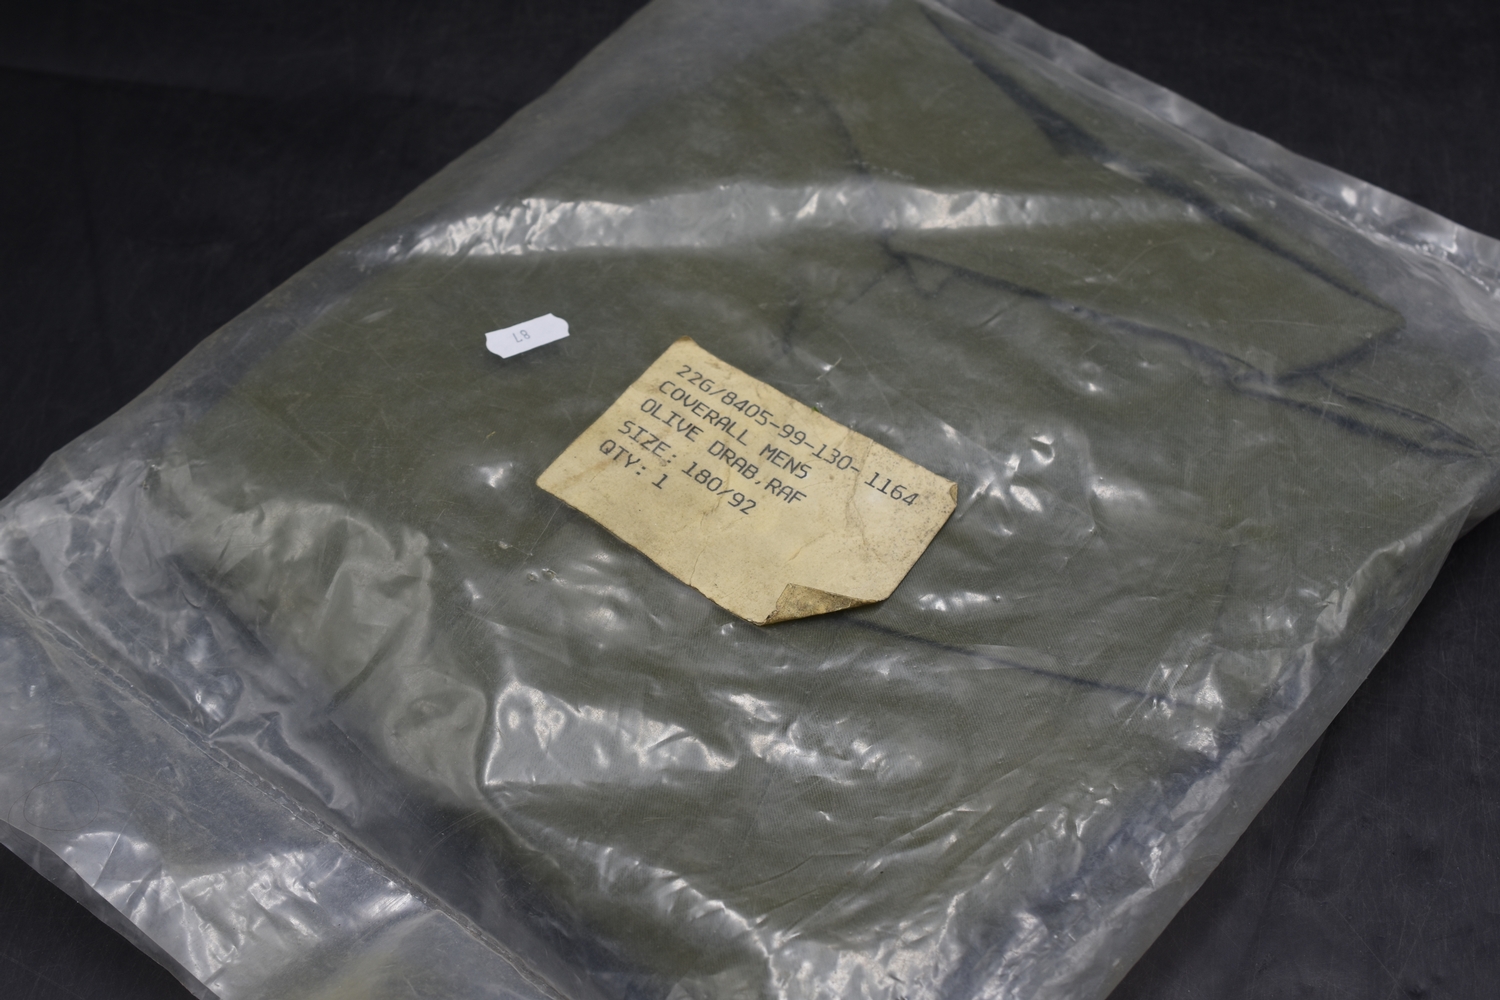 RAF Olive Drab Men's Coverall Unused and Sealed in Original Bag